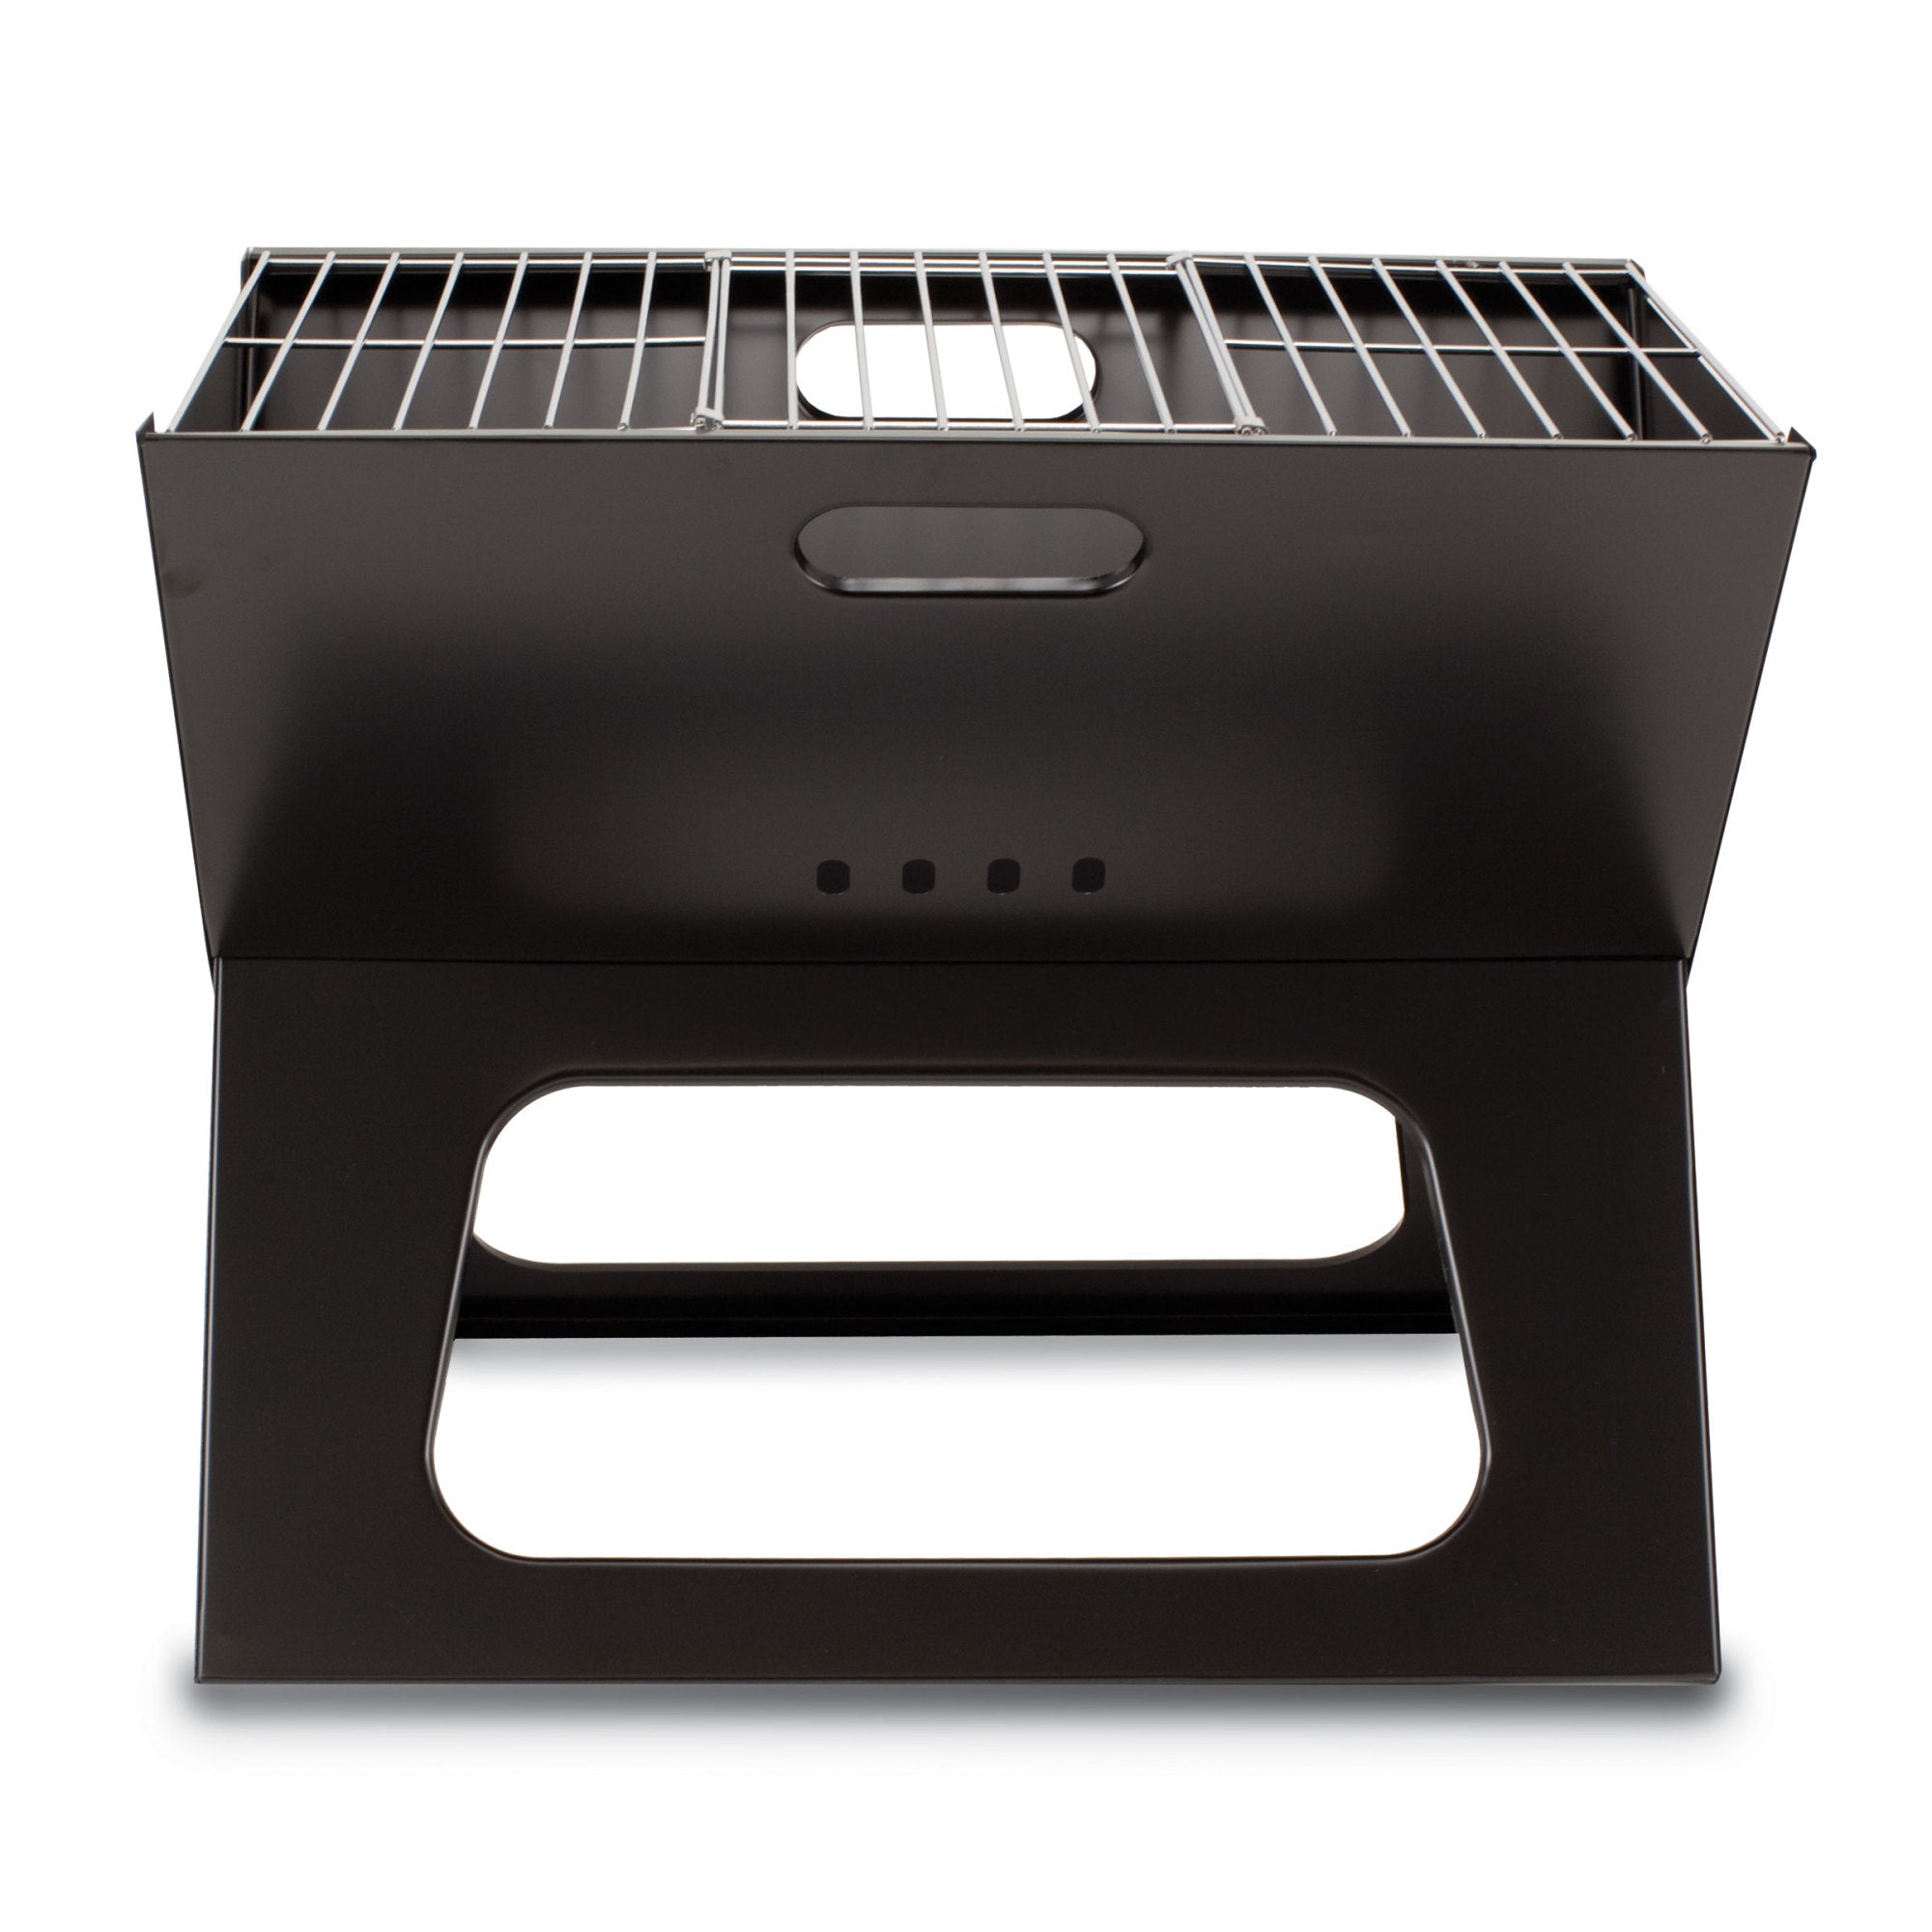 Purdue Boilermakers - X-Grill Portable Charcoal BBQ Grill